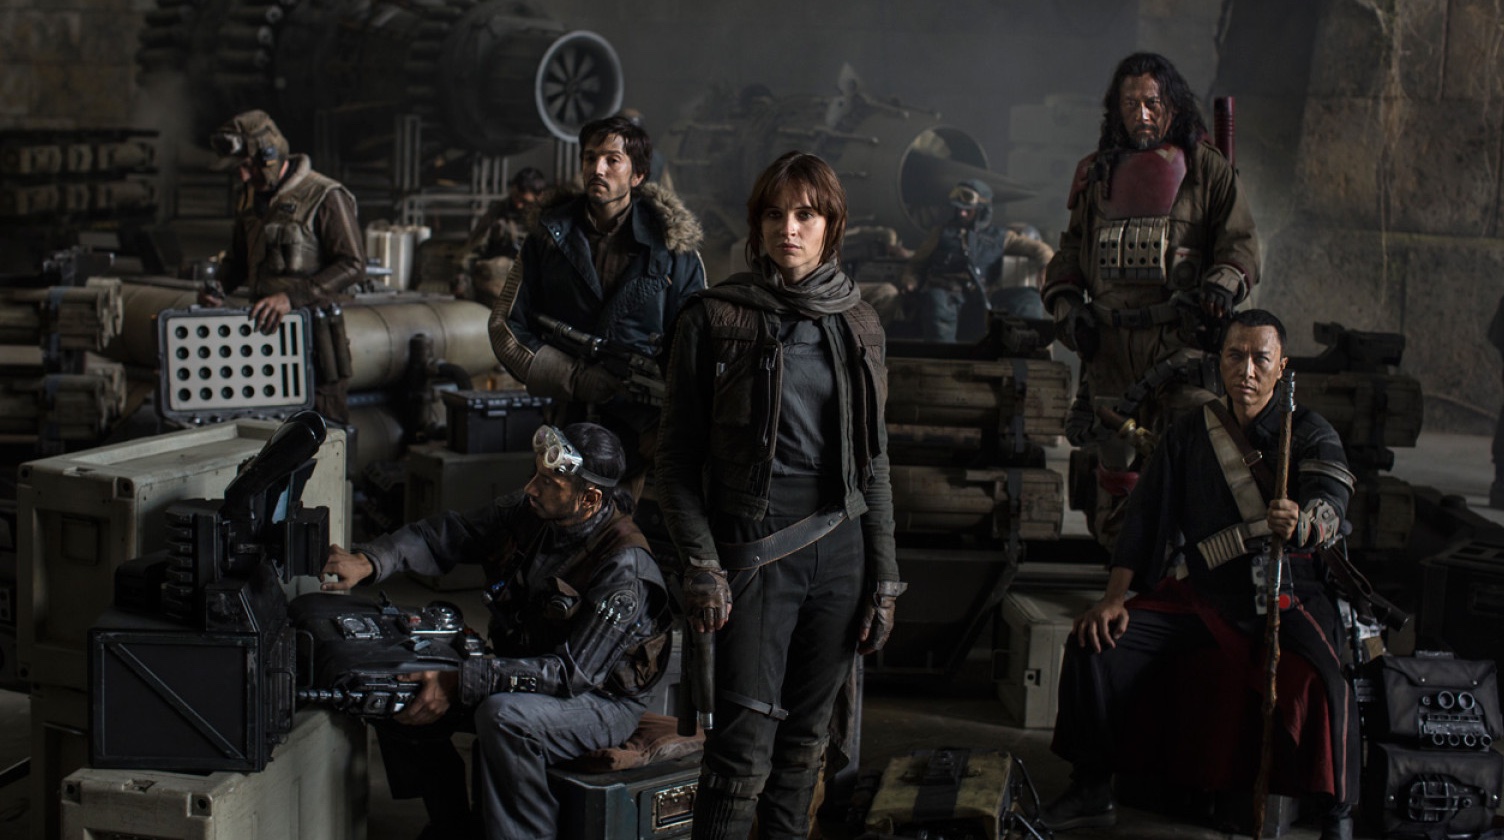 ‘Rogue One’ Tickets Now on Sale • chorus.fm